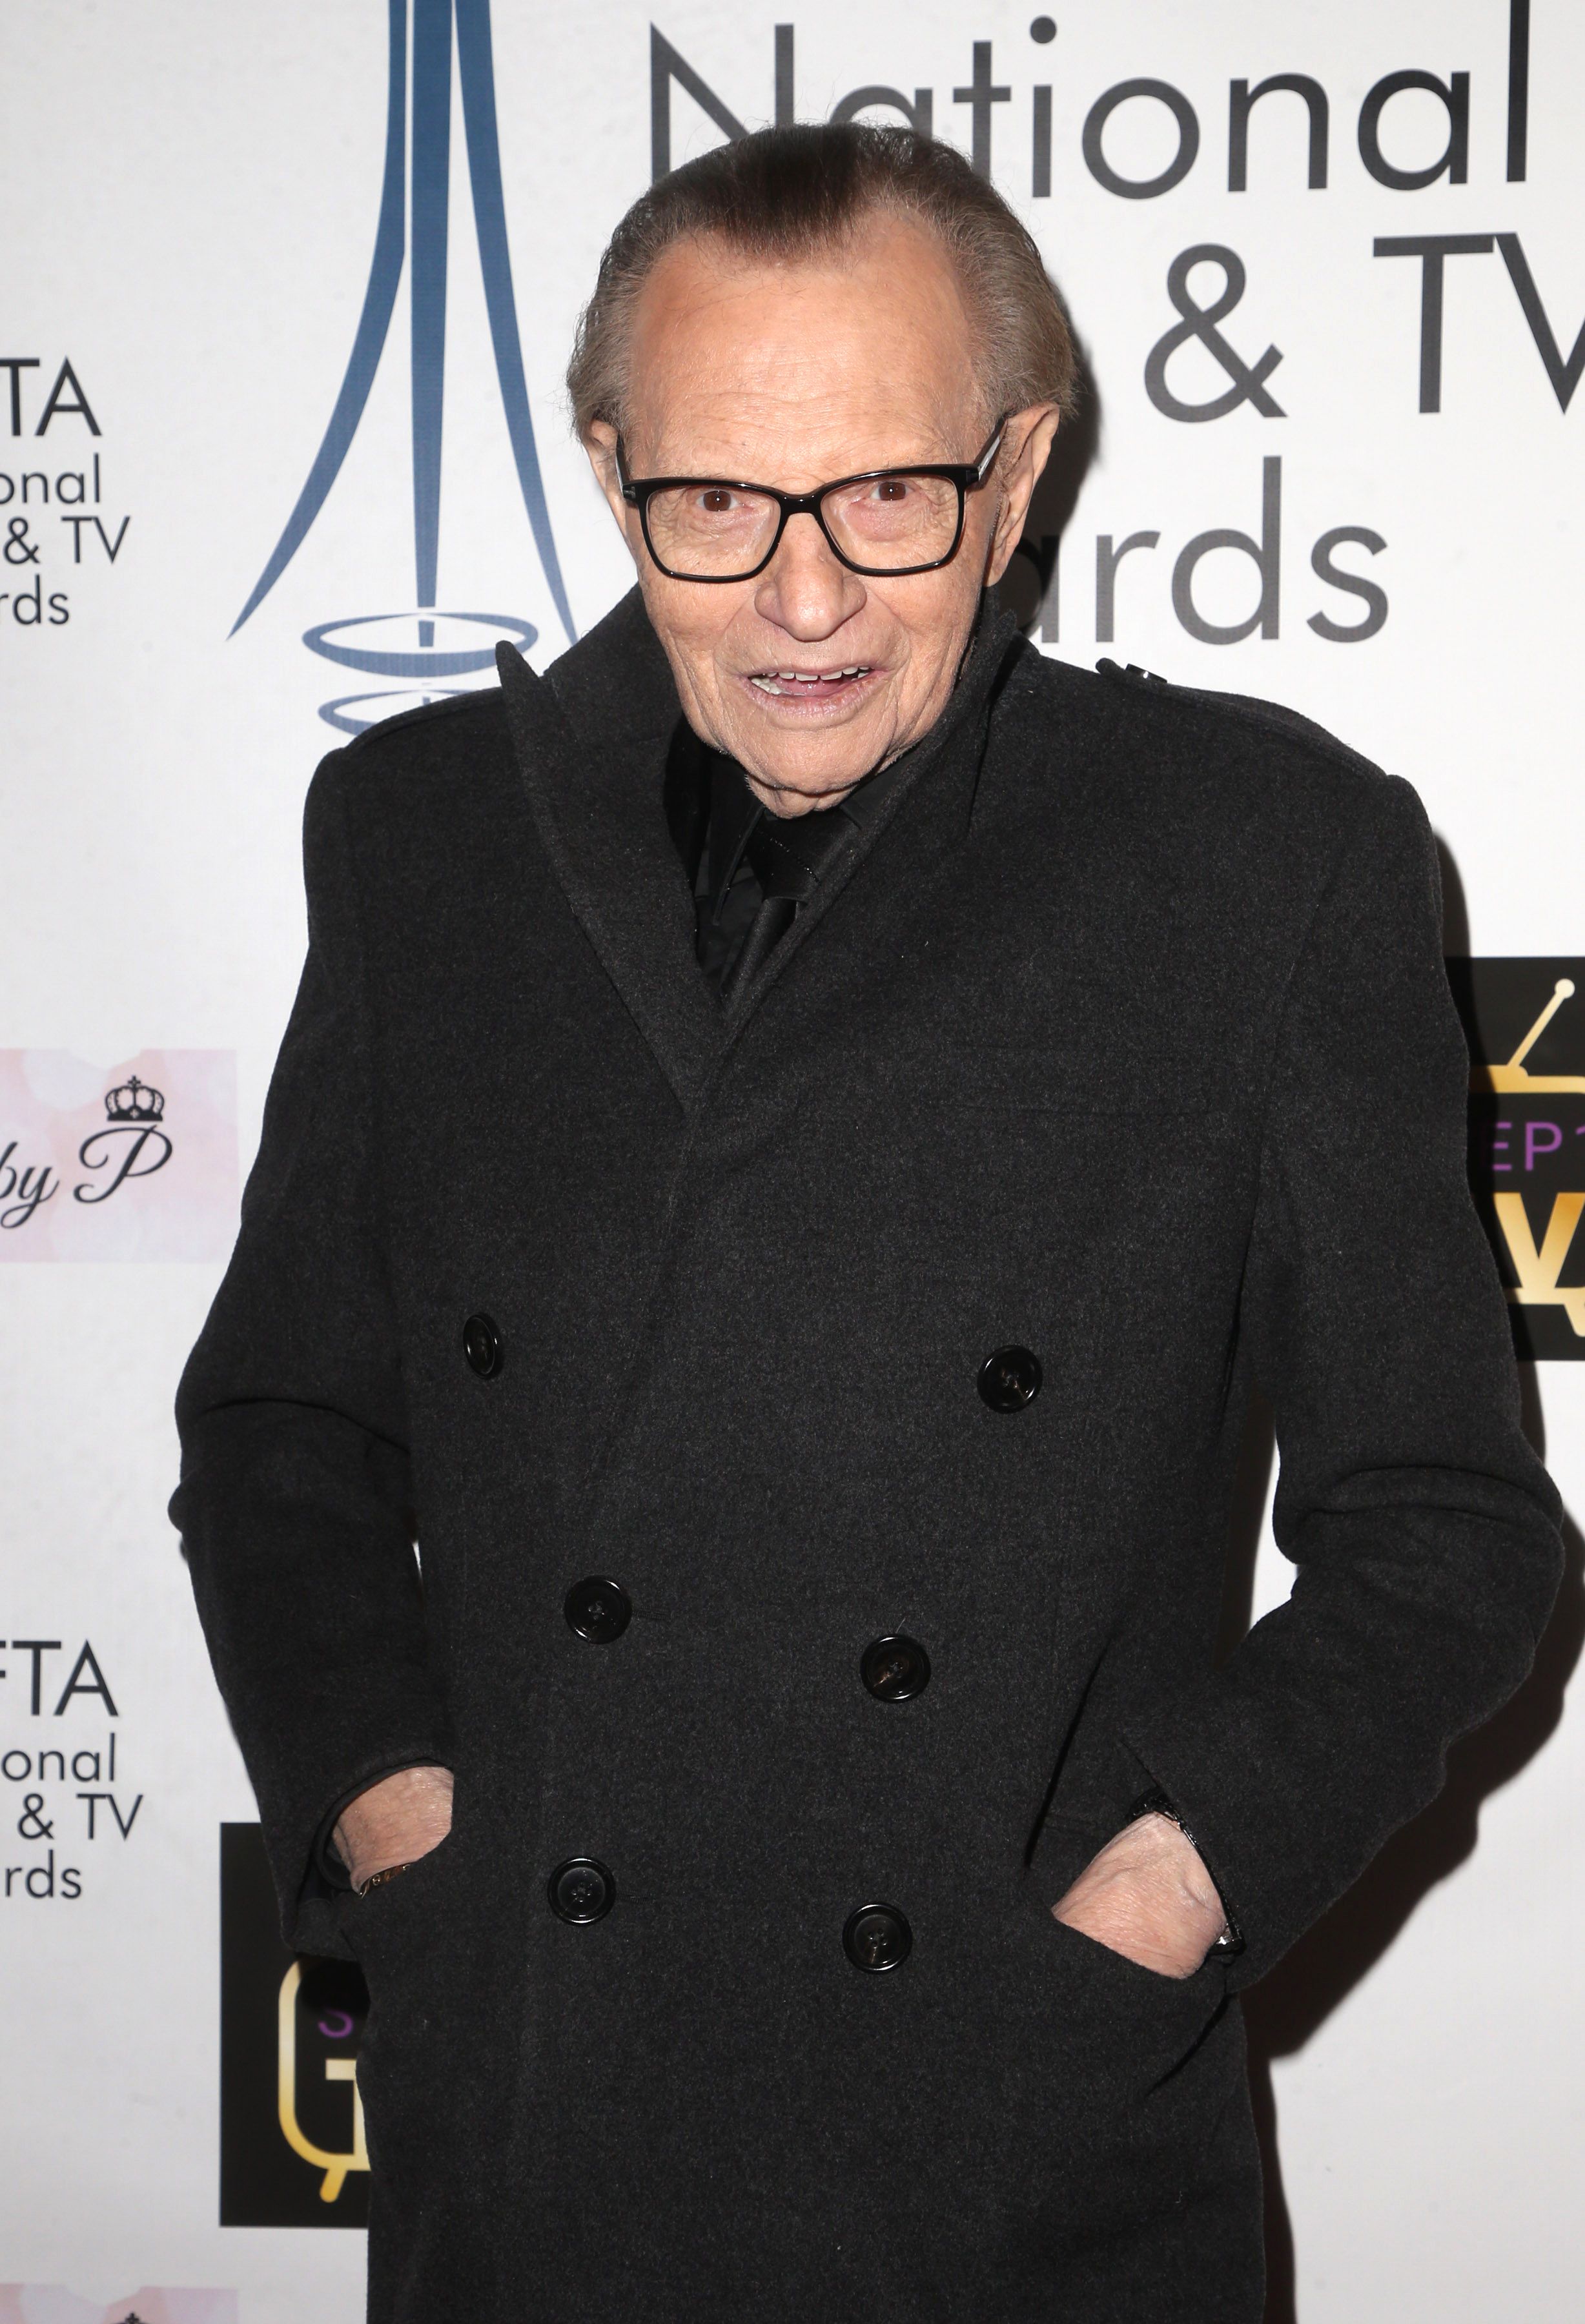 <p>Broadcast legend Larry King <a href="https://www.wonderwall.com/celebrity/hollywood-reacts-to-larry-kings-death-420022.gallery">passed away</a> at Cedars-Sinai Medical Center in Los Angeles at 87 on Jan. 23, 2021 -- just a few weeks after leaving the ICU for a regular hospital room after facing breathing issues amid his battle with COVID-19 that began in December. His sixth wife, Julia Alexander, told the New York Post that Larry died from coronavirus complications, but most recent wife Shawn Southwick King -- who was in the midst of divorce proceedings with Larry when he died -- told <a href="https://www.etonline.com/shawn-king-reveals-husband-larry-kings-final-words-to-her-says-covid-19-was-not-cause-of-death">"Entertainment Tonight"</a> that the cause of death "was an infection, it was sepsis," adding, "Well, he was finally ready to go, I will tell you that. You know, he never wanted to go but his sweet little body was just, it had just been hit so many times with so many things and once we heard the word COVID, all of our hearts just sunk. But he beat it, you know, he beat it, but it did take its toll and then the unrelated infection finally is what took him, but boy, he was not gonna go down easily."</p>